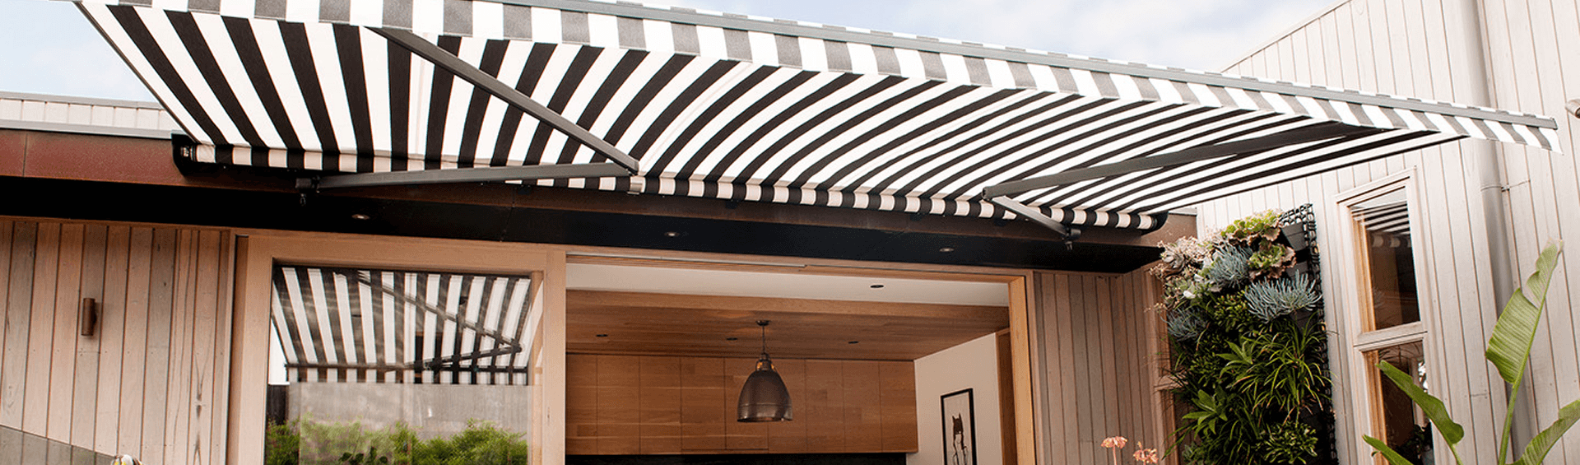 Outdoor blinds and awnings